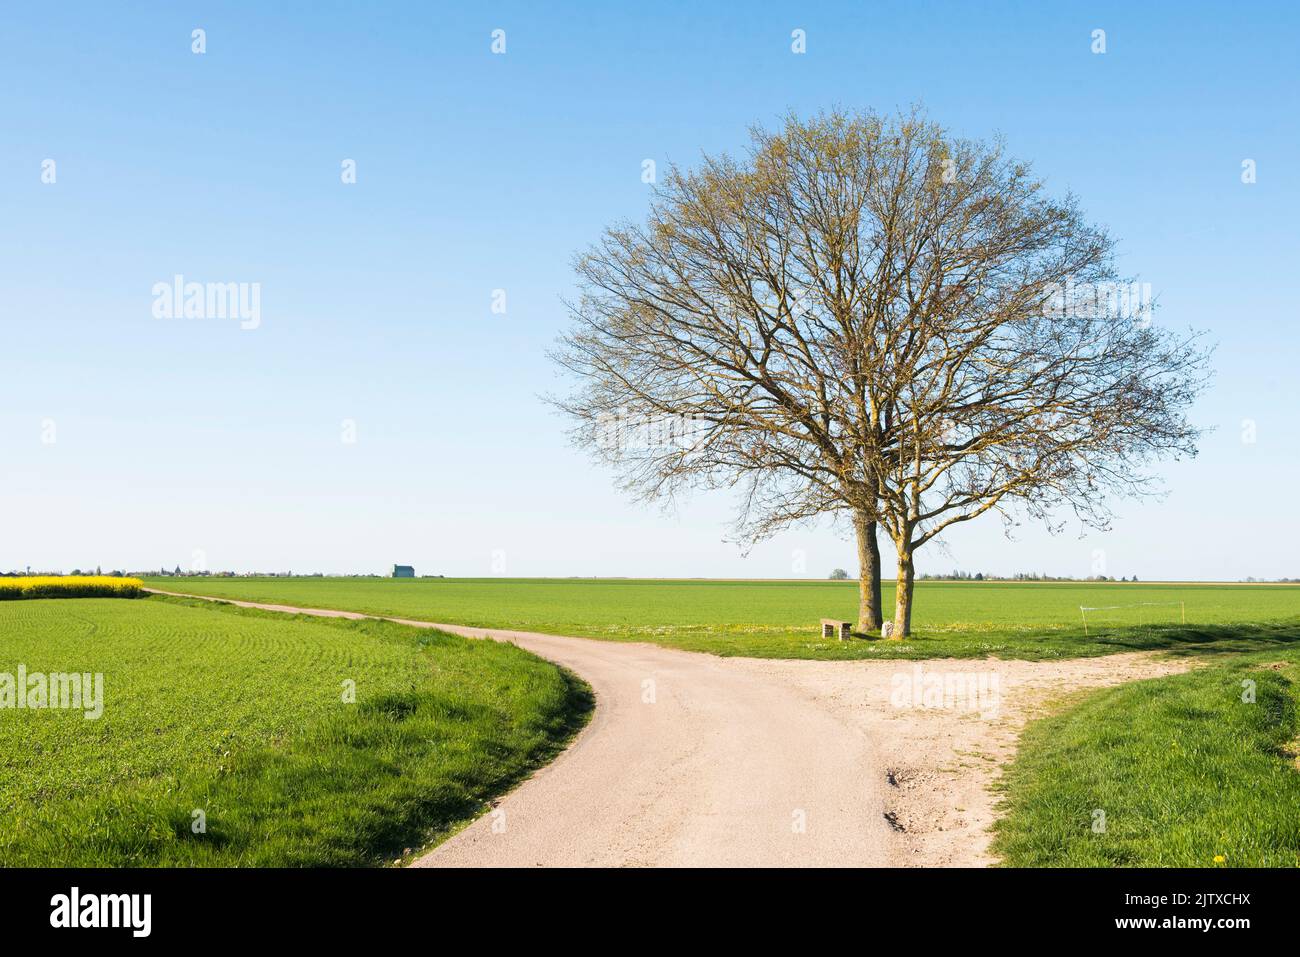 Two isolated trees in a large plain on the edge of a country road in Saint-Laurent-la-Gatine, Eure-et-Loir department, Centre-Val-de-Loire region, Stock Photo